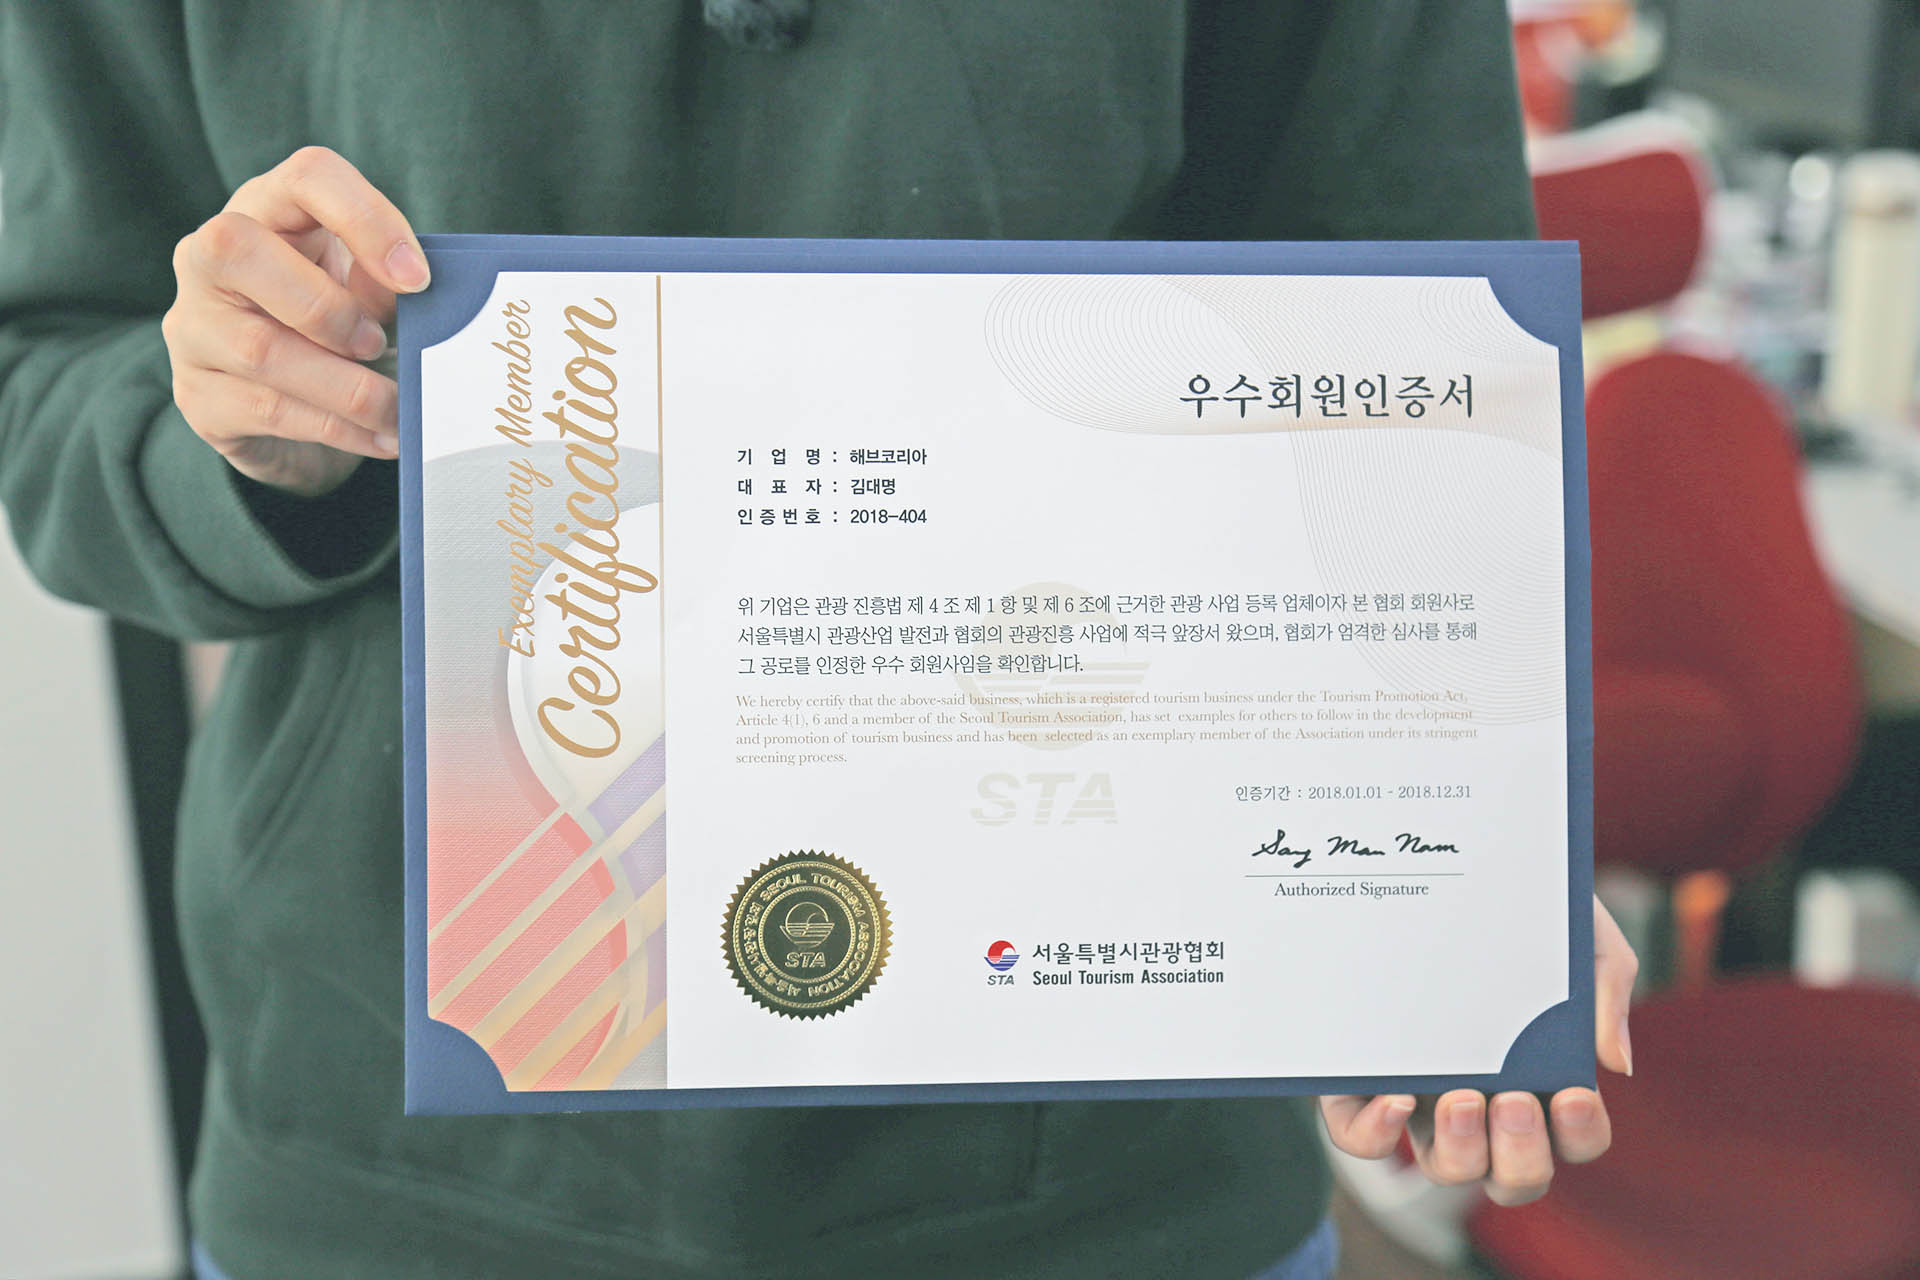 HaB Korea recognized as an exemplary member by the Seoul Tourism Association